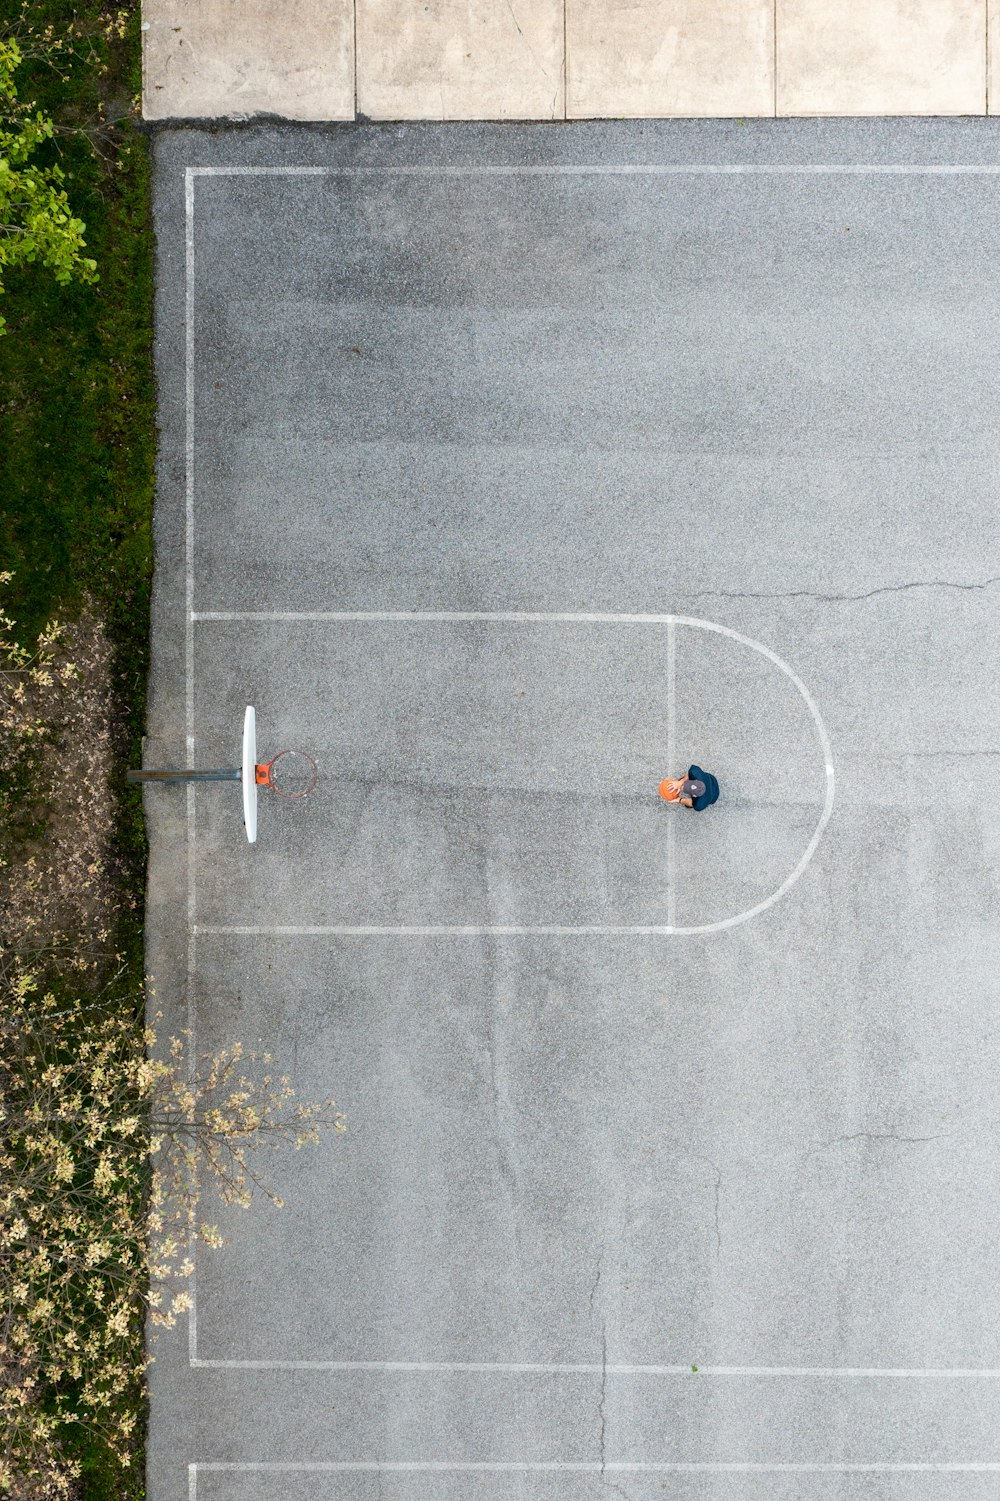 two people are standing on a basketball court